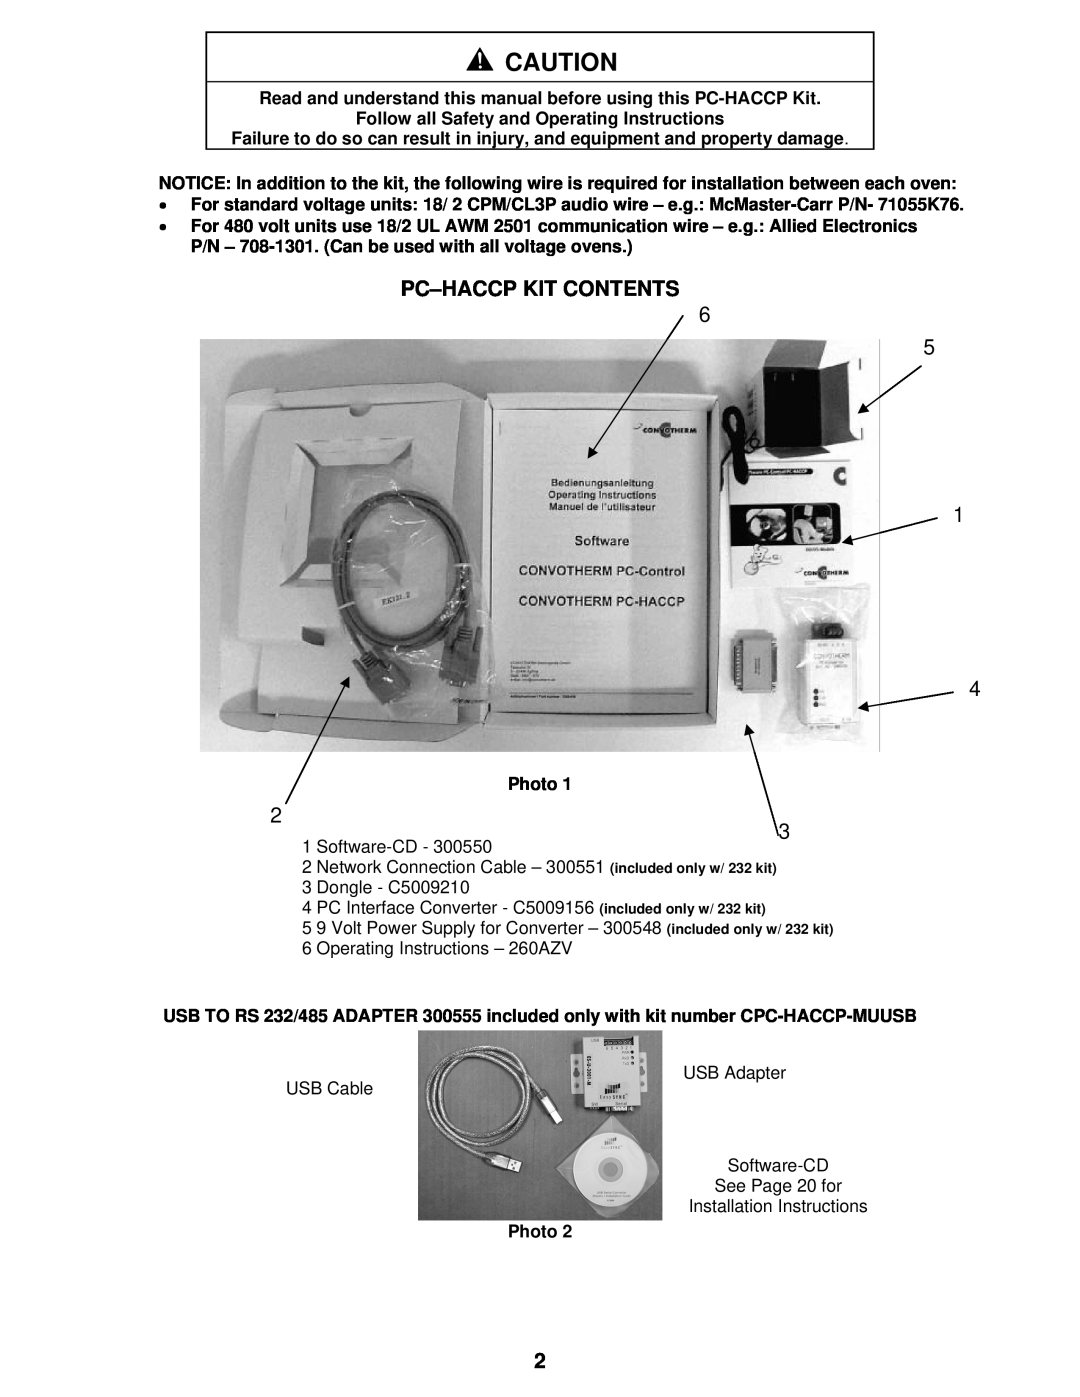 Cleveland Range Steam Oven Pc-Haccp Kit Contents, Read and understand this manual before using this PC-HACCP Kit, Photo 